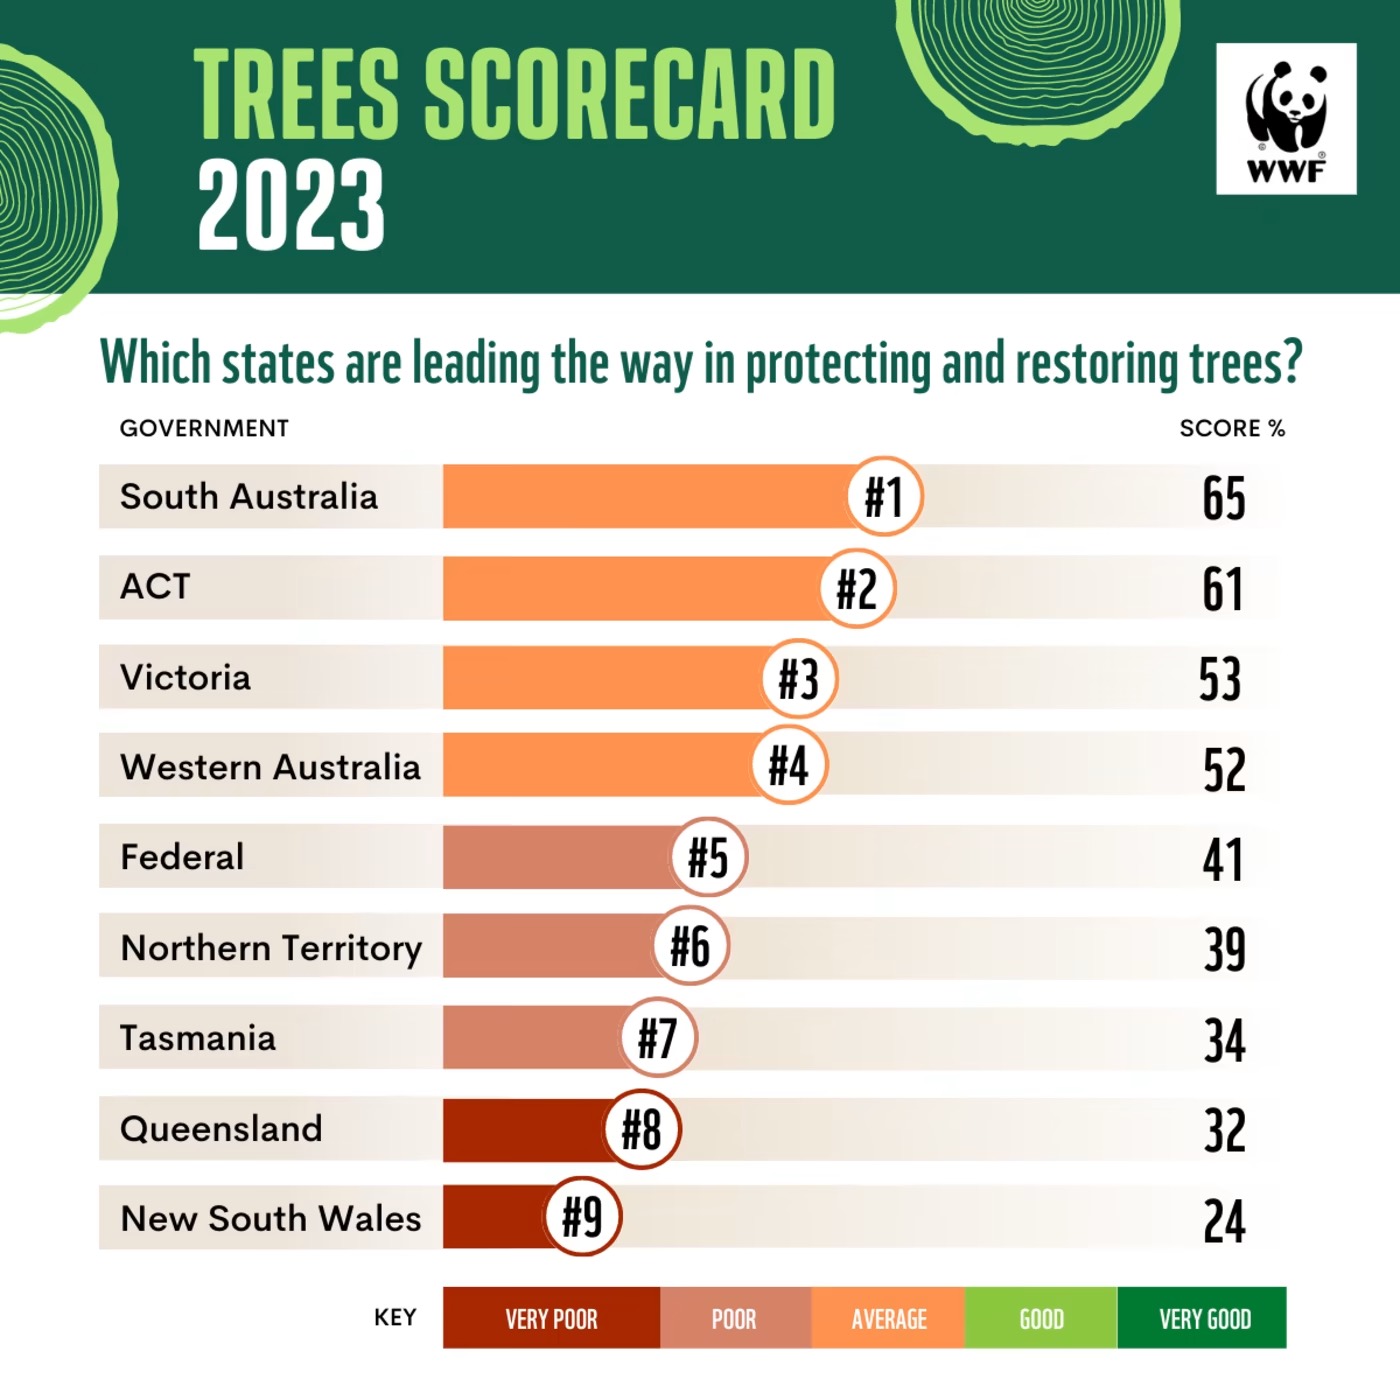 WWF Australia Trees Scorecard 2023 depicting "Which states are leading the way in protecting and restoring trees?". South Australia #1, 65%; ACT #2, 61%; Victoria #1, 53%; Western Australia #4, 52%; Federal #5, 41%;, Northern Territory #6, 39%; Tasmania #7, 34%; Queensland #8, 32%; New South Wales #9, 24%.